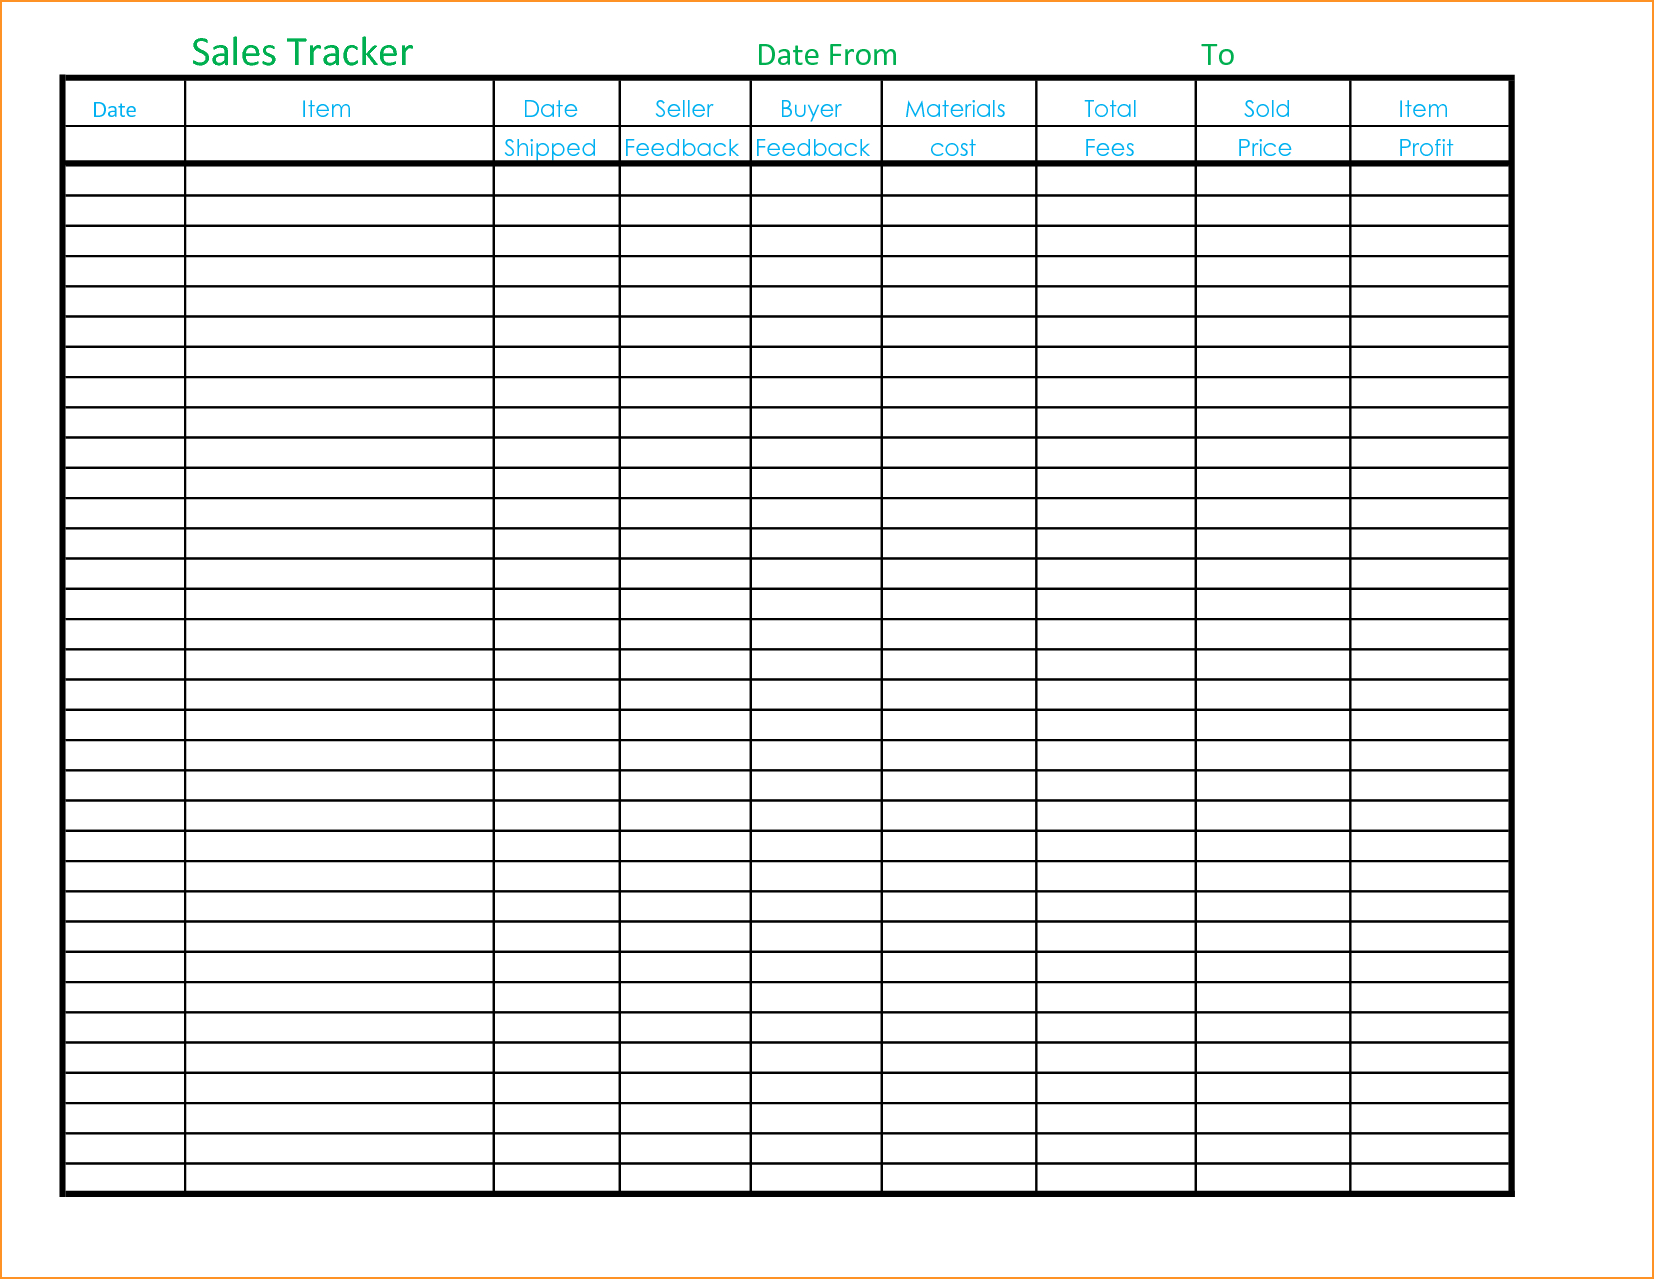 customer-order-tracking-excel-template-free-resume-gallery